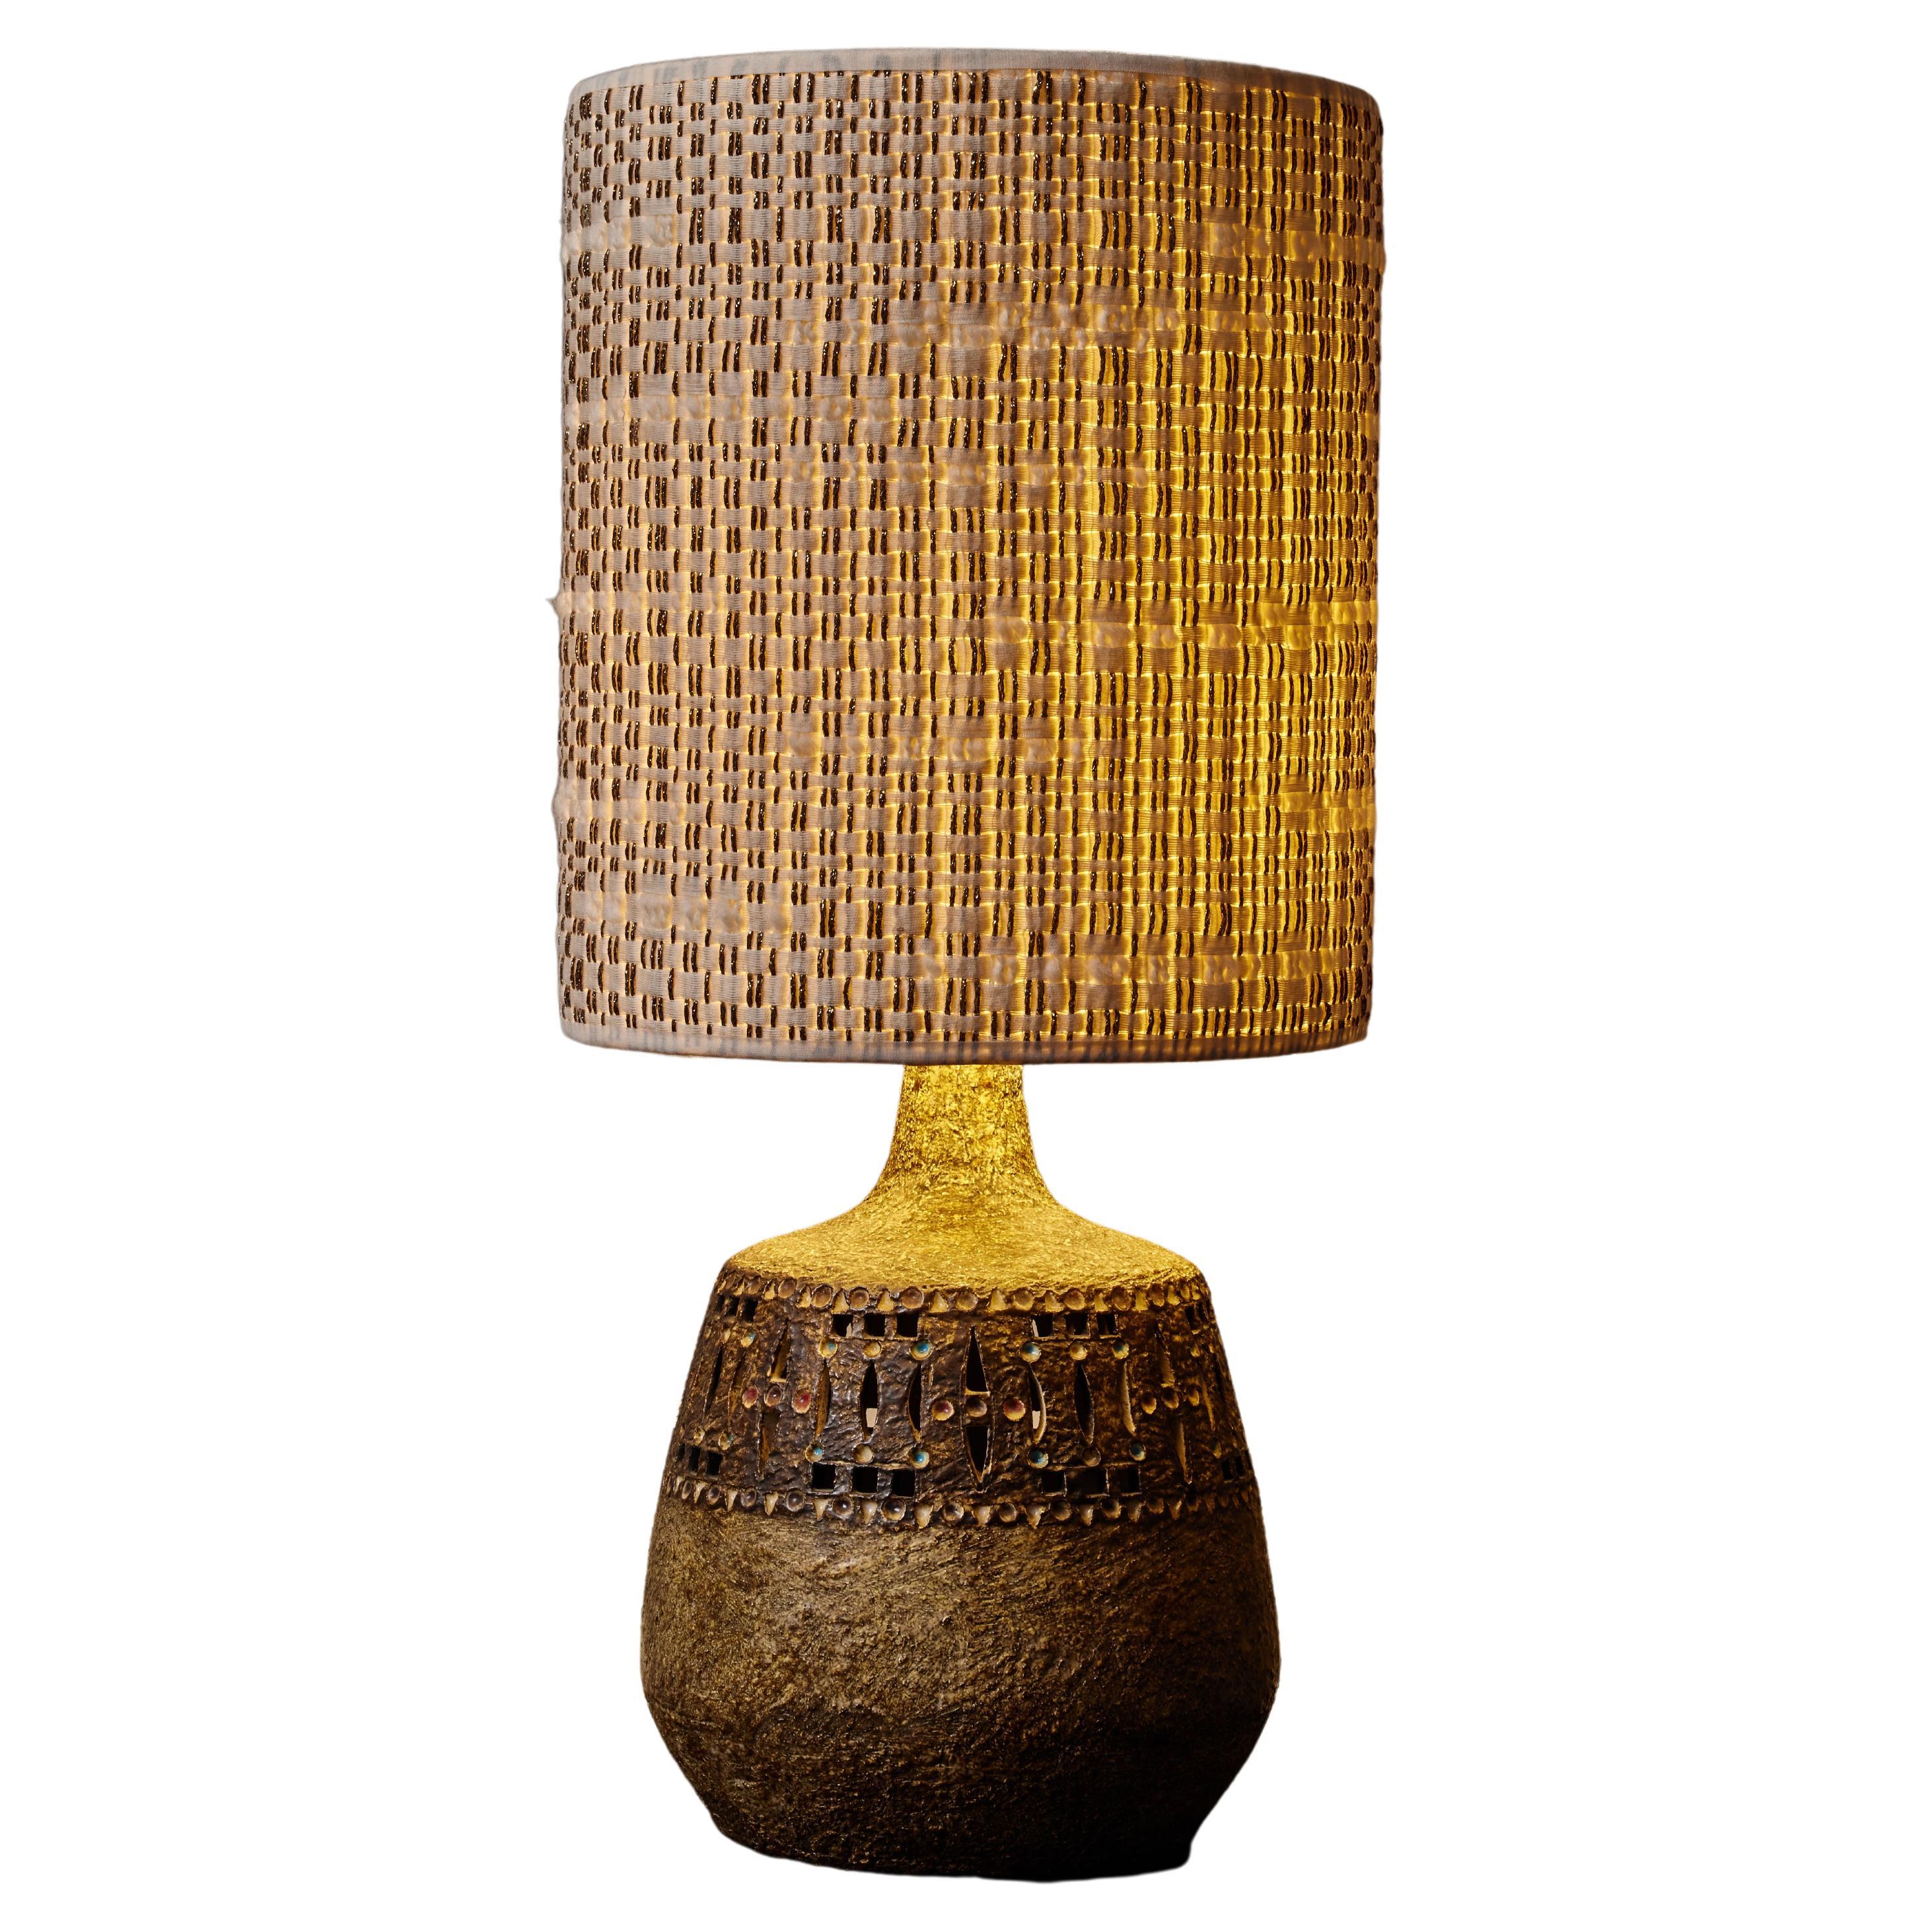 Giarusso Earth Tones Ceramic Table Lamp with Dedar Lamp Shade For Sale